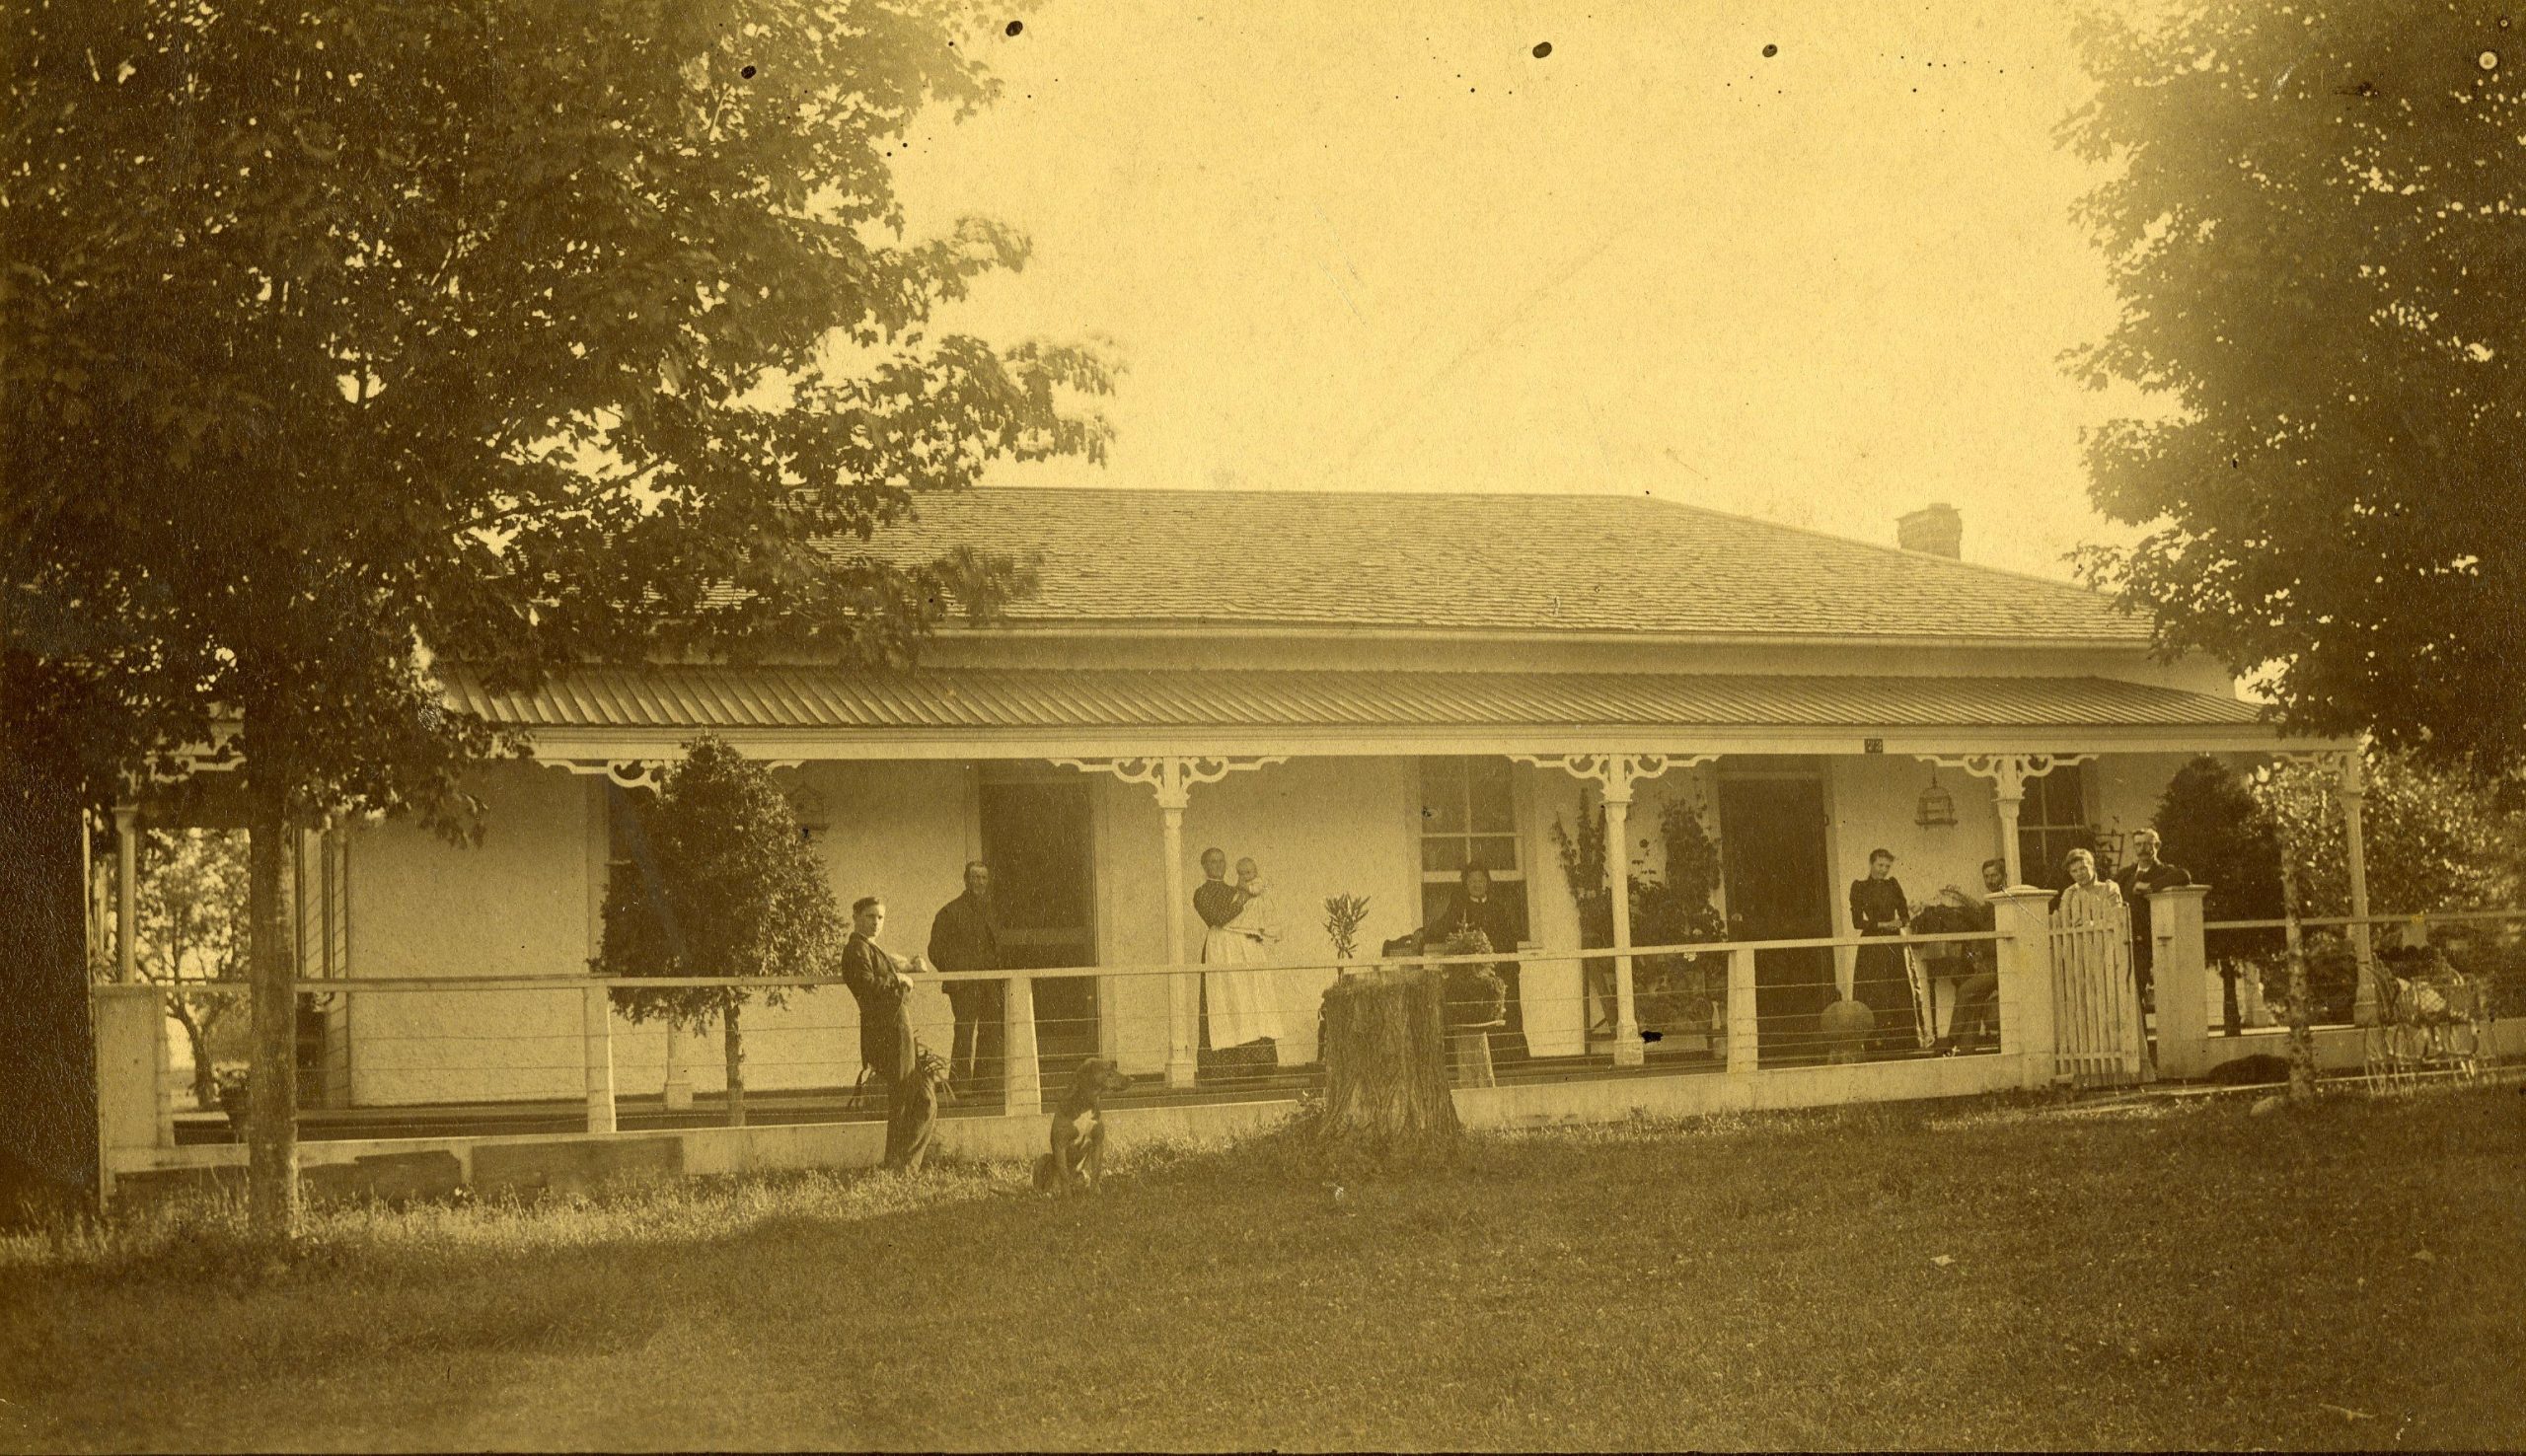 Historic image of the Ballatyne home on the bank of the Maitland River. There are a number of people standing on a wide front porch.